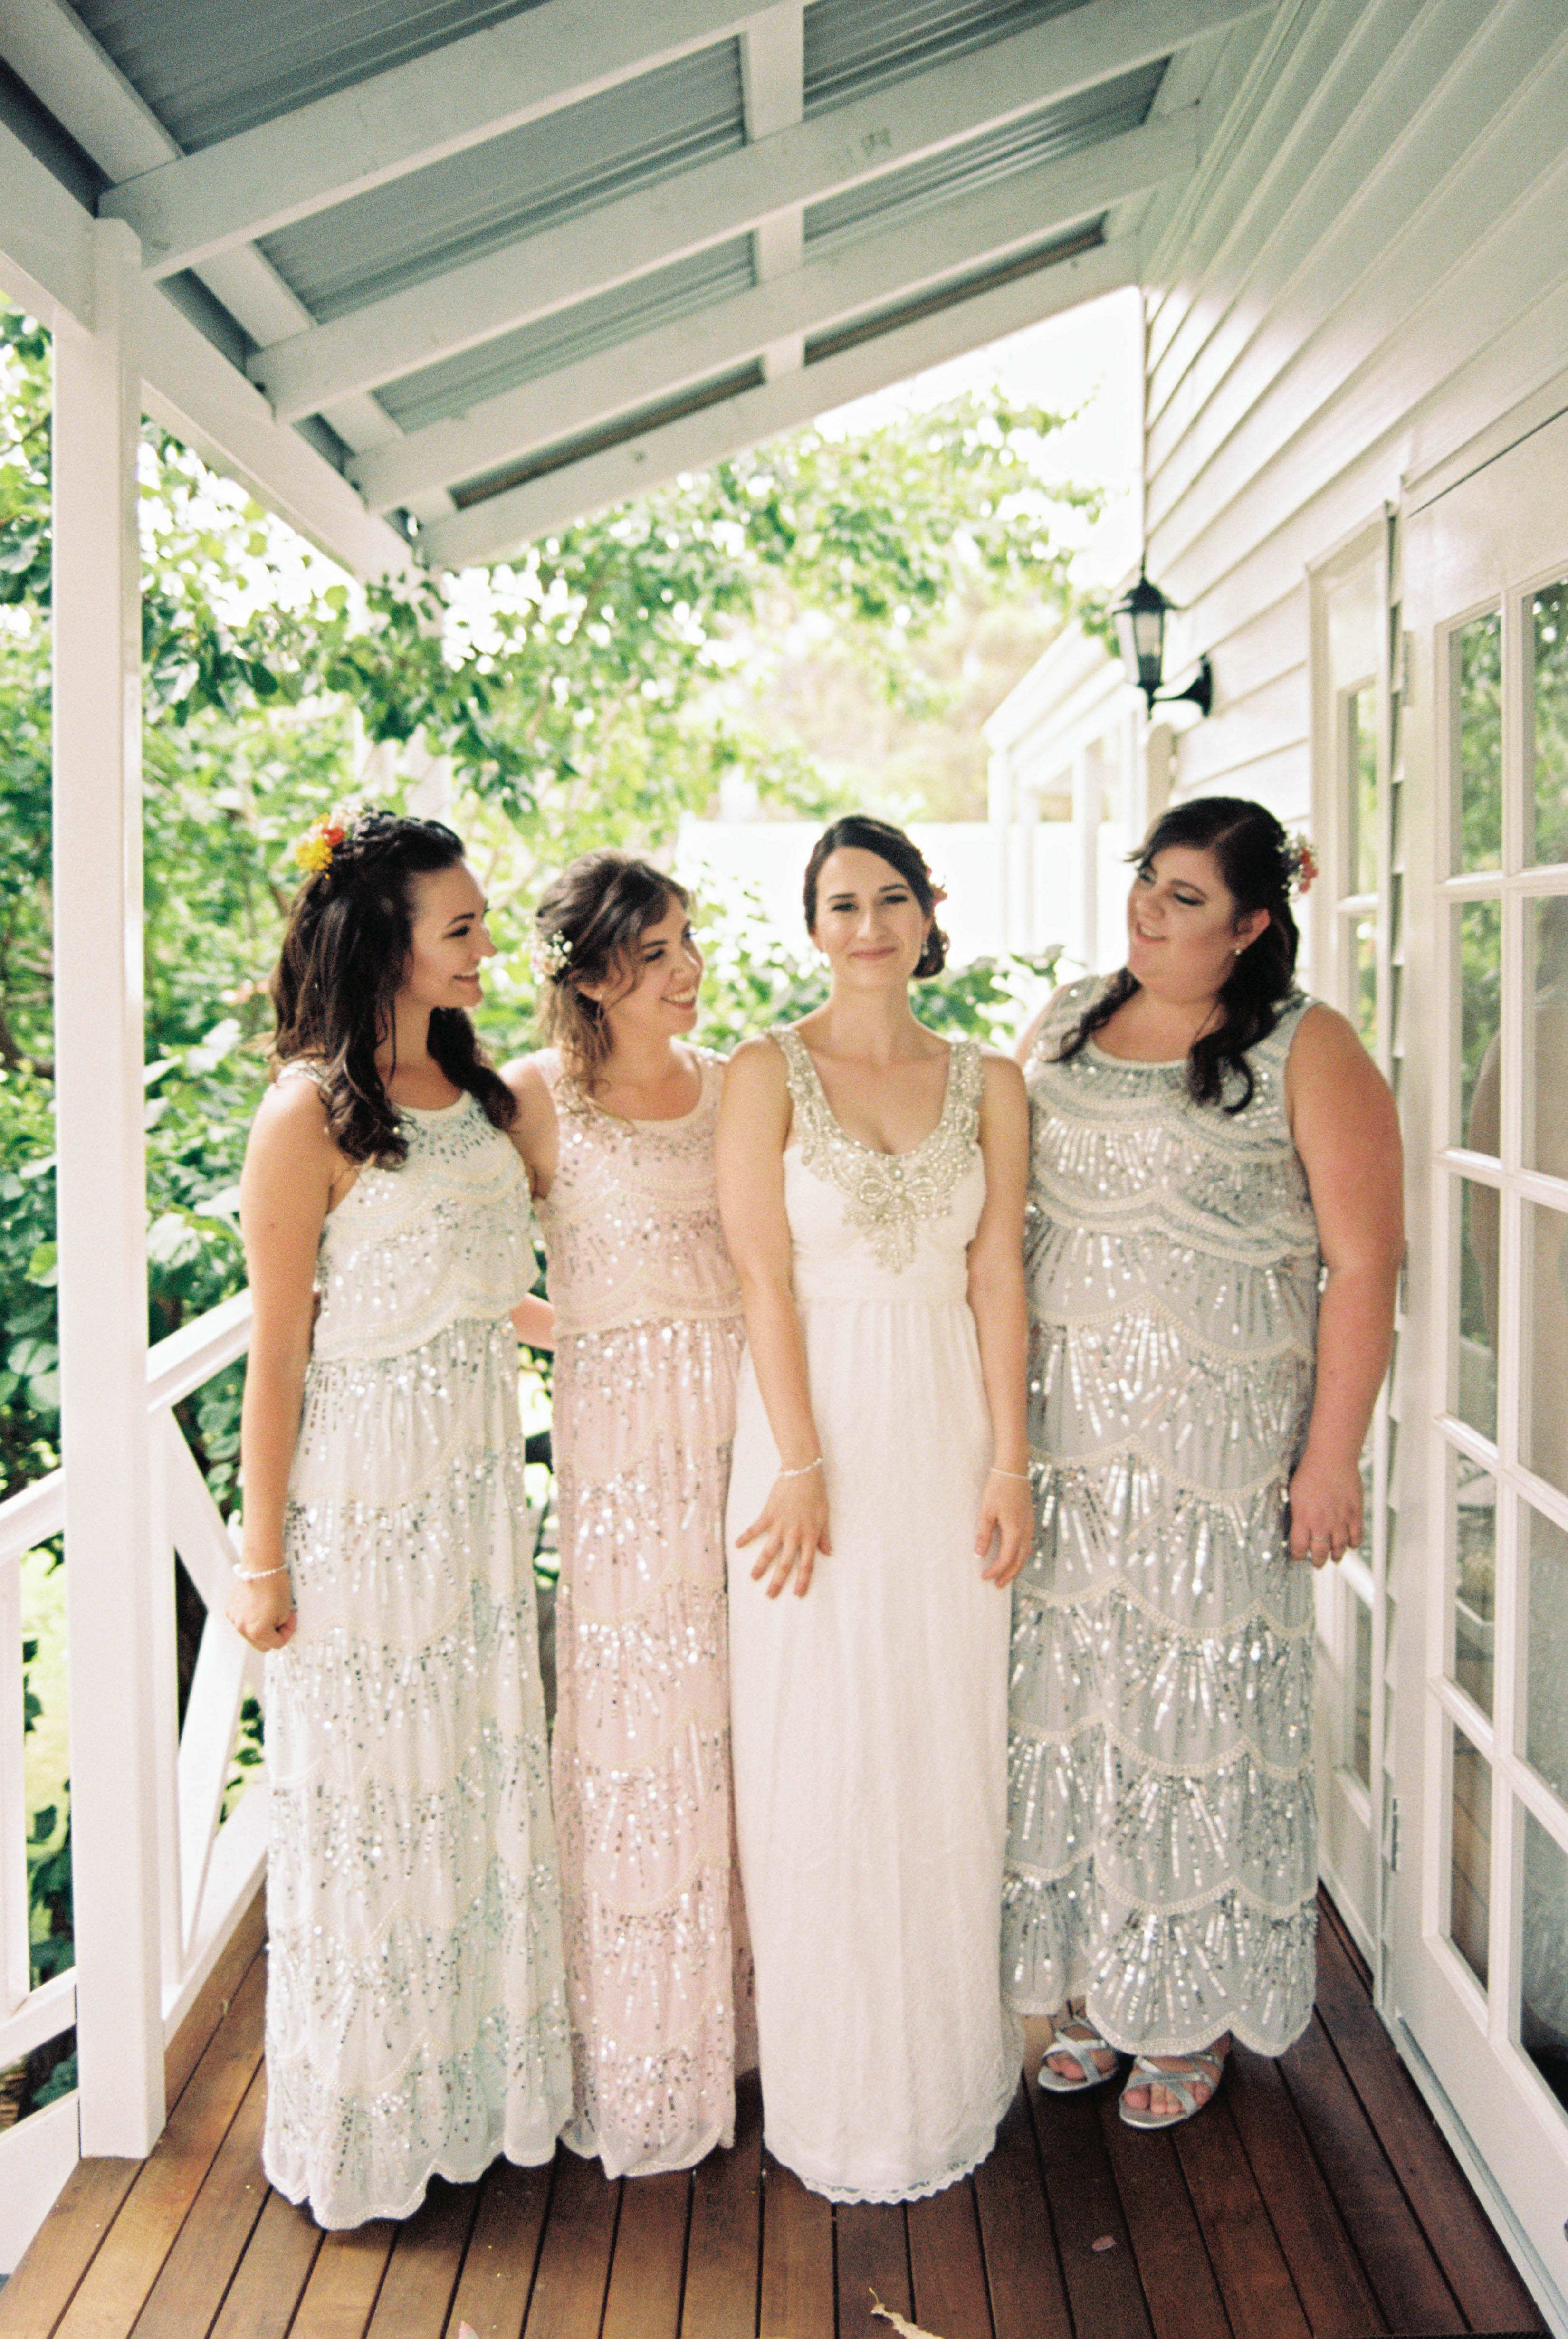 A photo of the bride and her bridesmaids the morning of her South West Destination Wedding taken by Rhianna May Italy and Australia Destination Wedding photographer